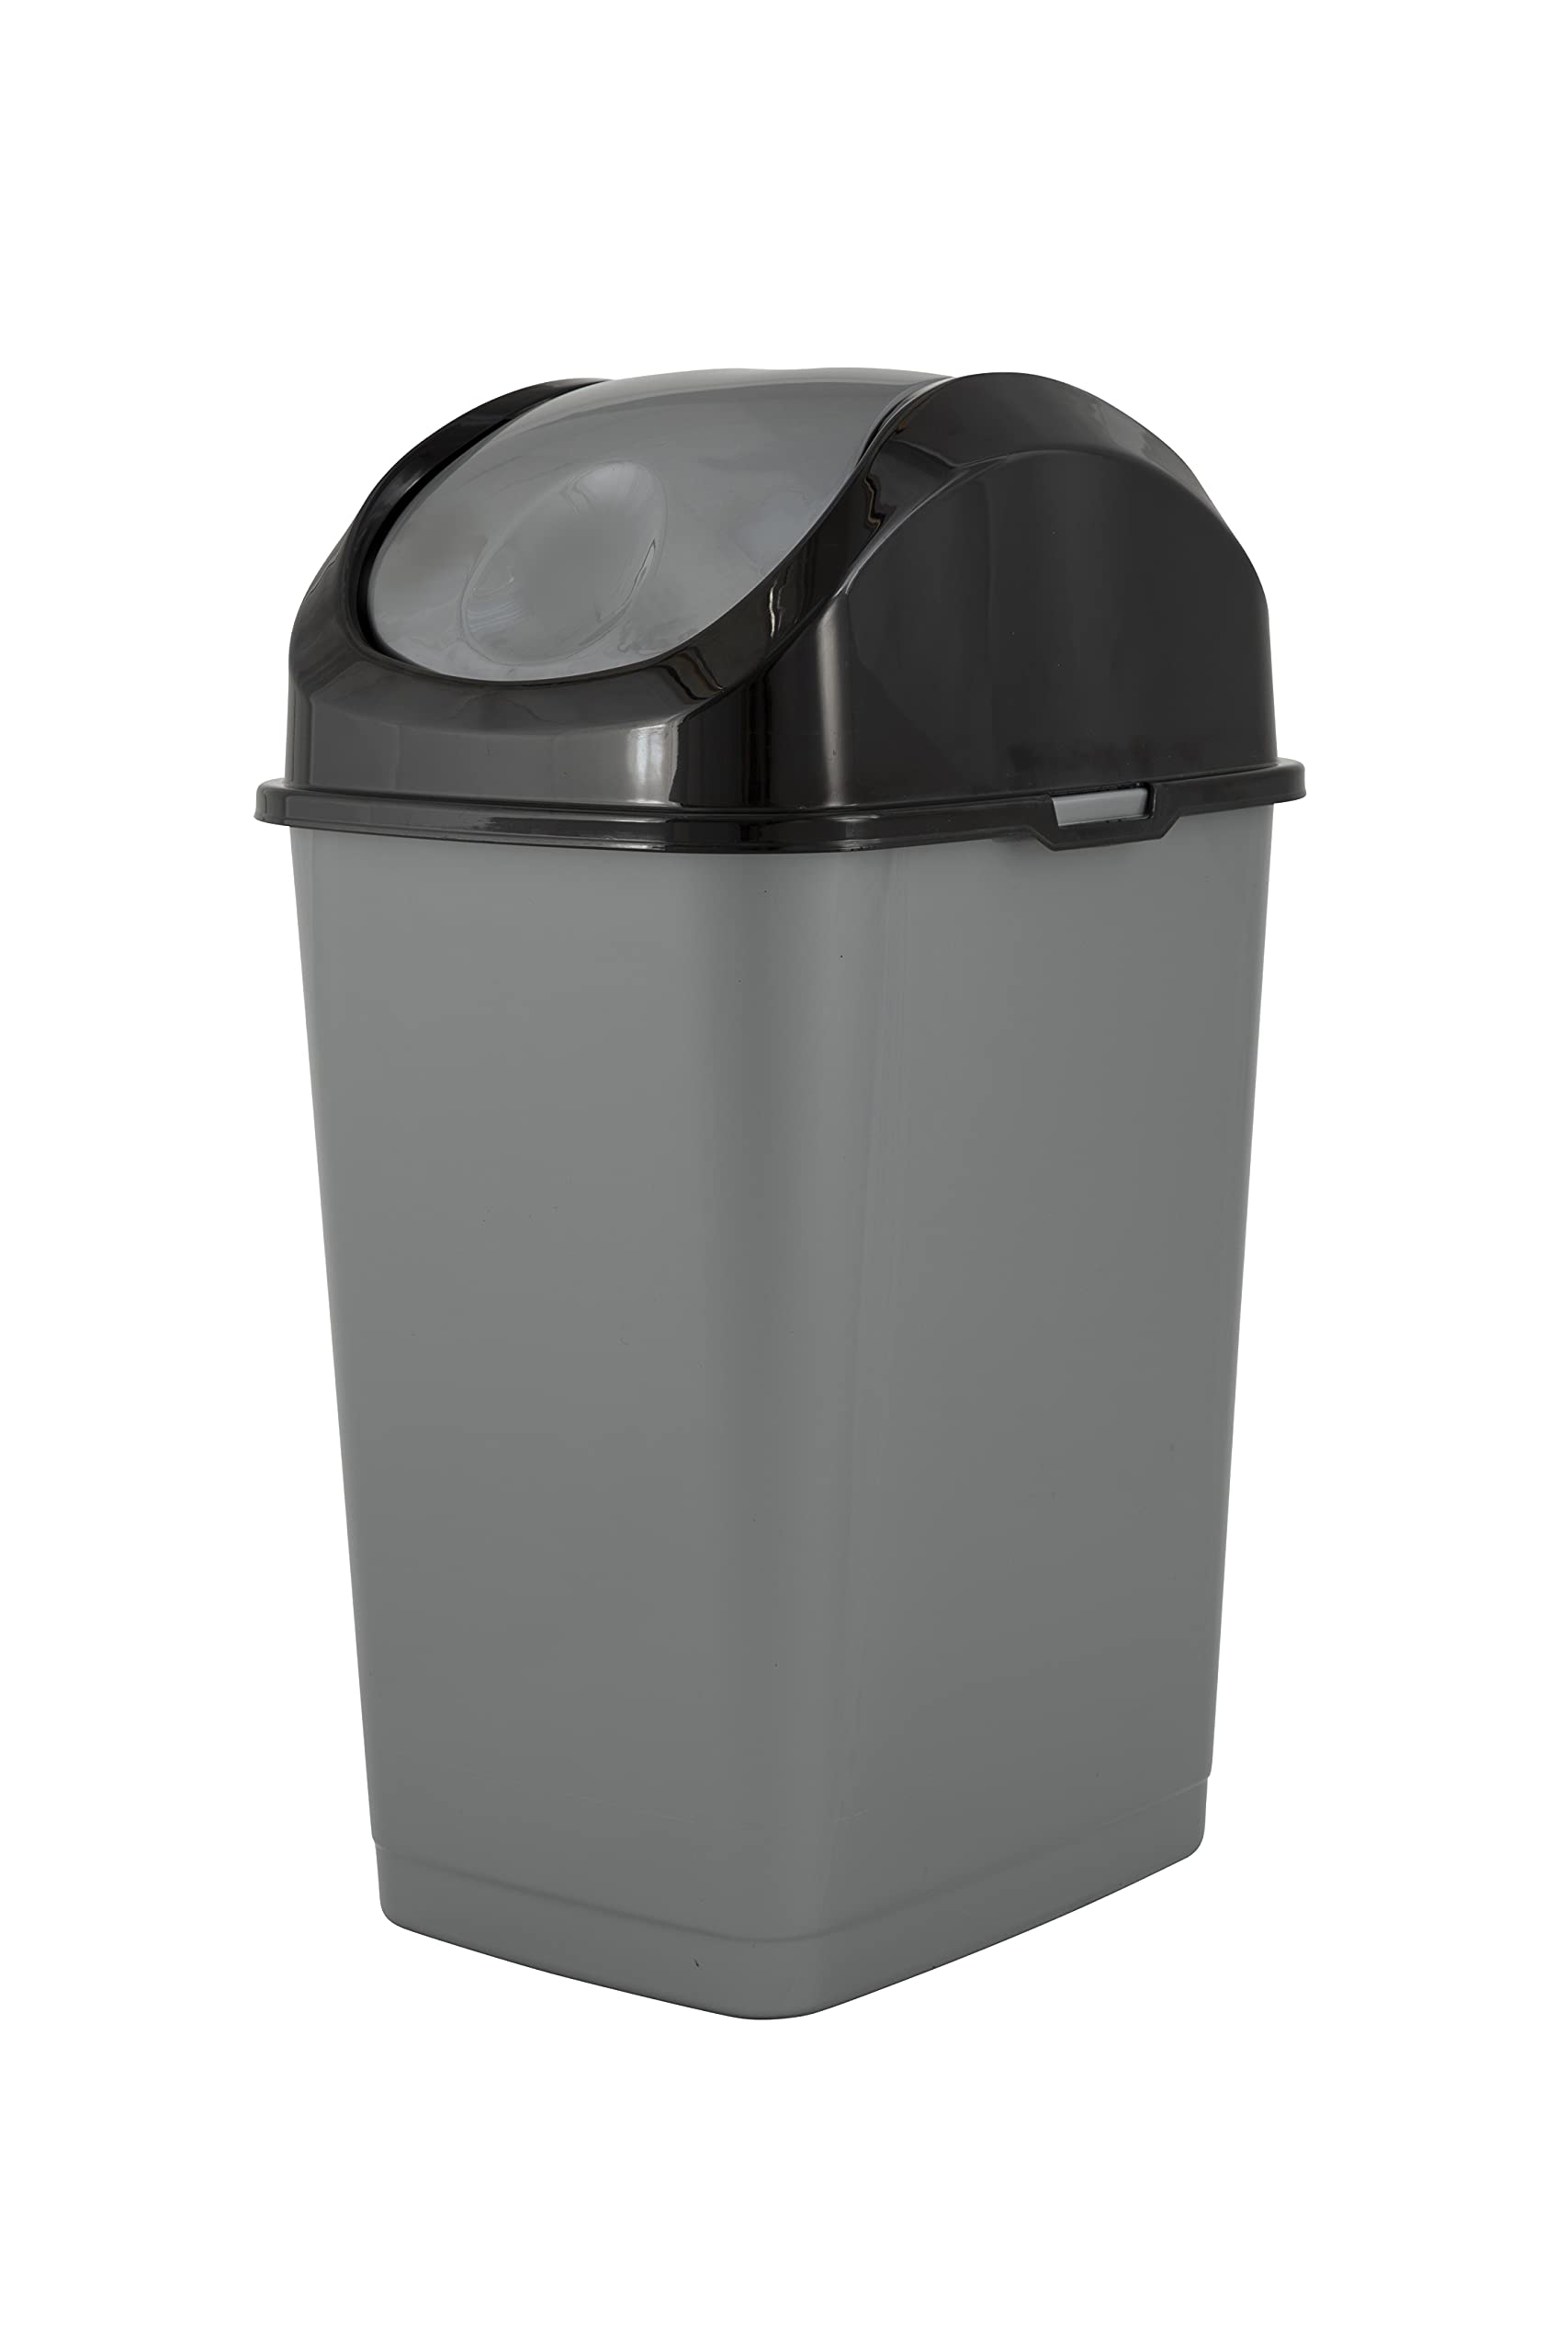 Book Cover Superio Compact Slim Trash Can 4.5 Gallon With Swing Top Cover (Gray and Black) 18 Liter 1 4.5 Gallon